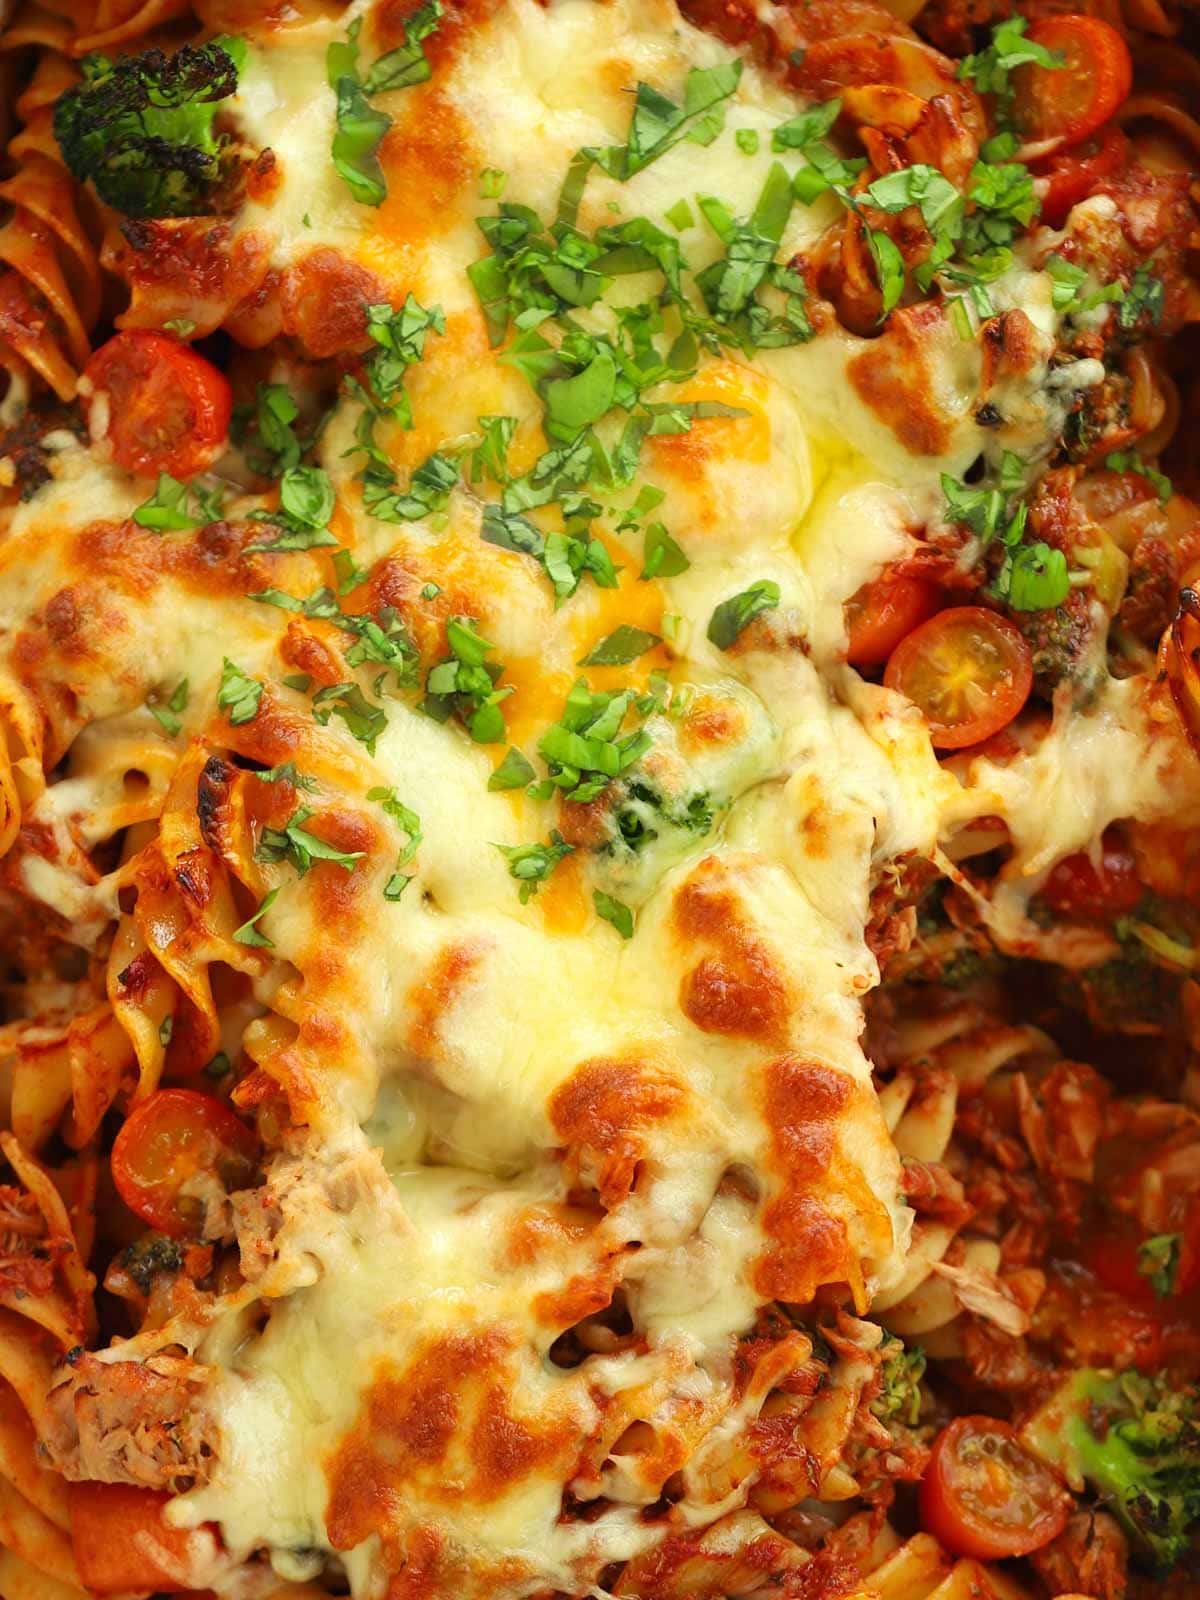 The ultimate Healthy Tuna Pasta Bake recipe is here.